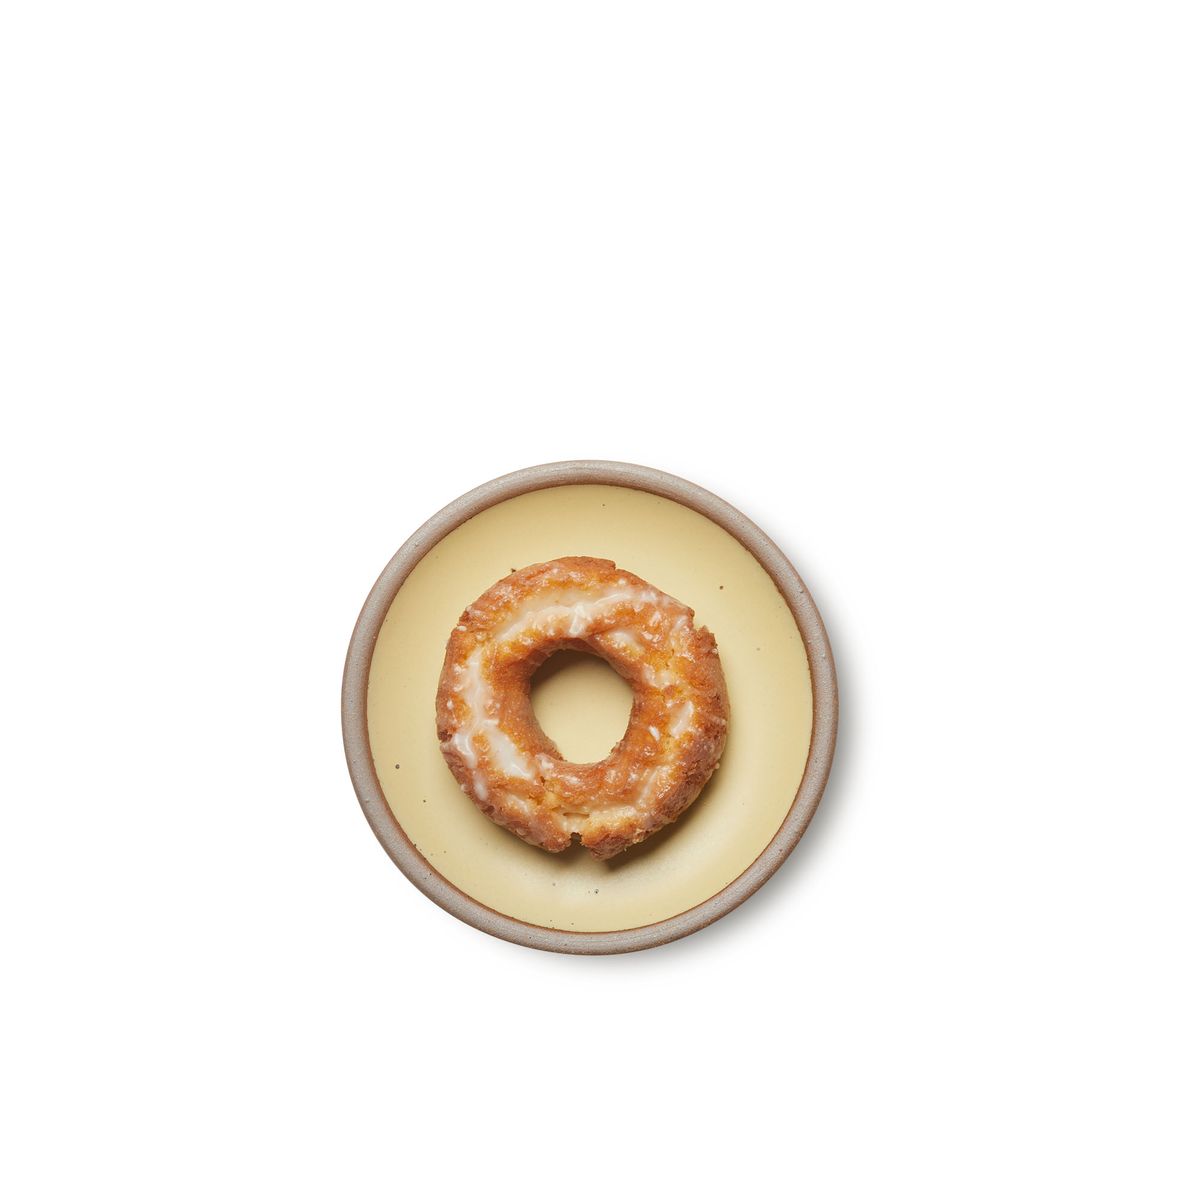 A glazed cake donut on a dessert sized ceramic plate in a light butter yellow color featuring iron speckles and an unglazed rim